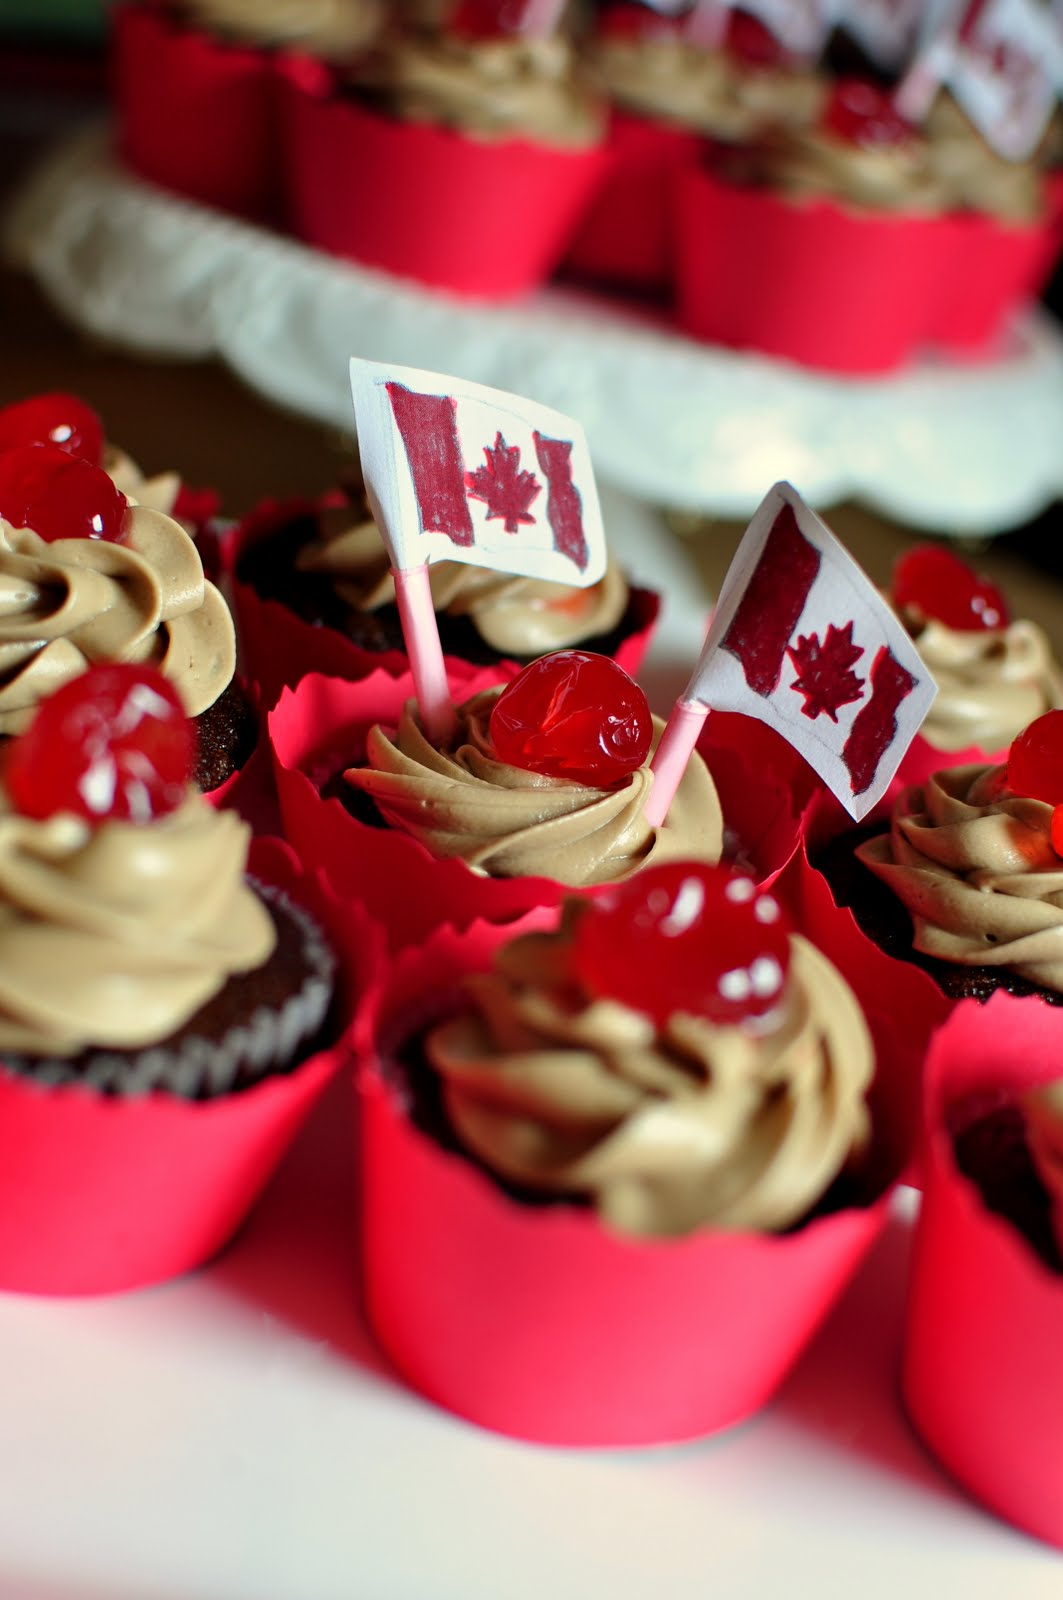 Canada+day+cupcakes